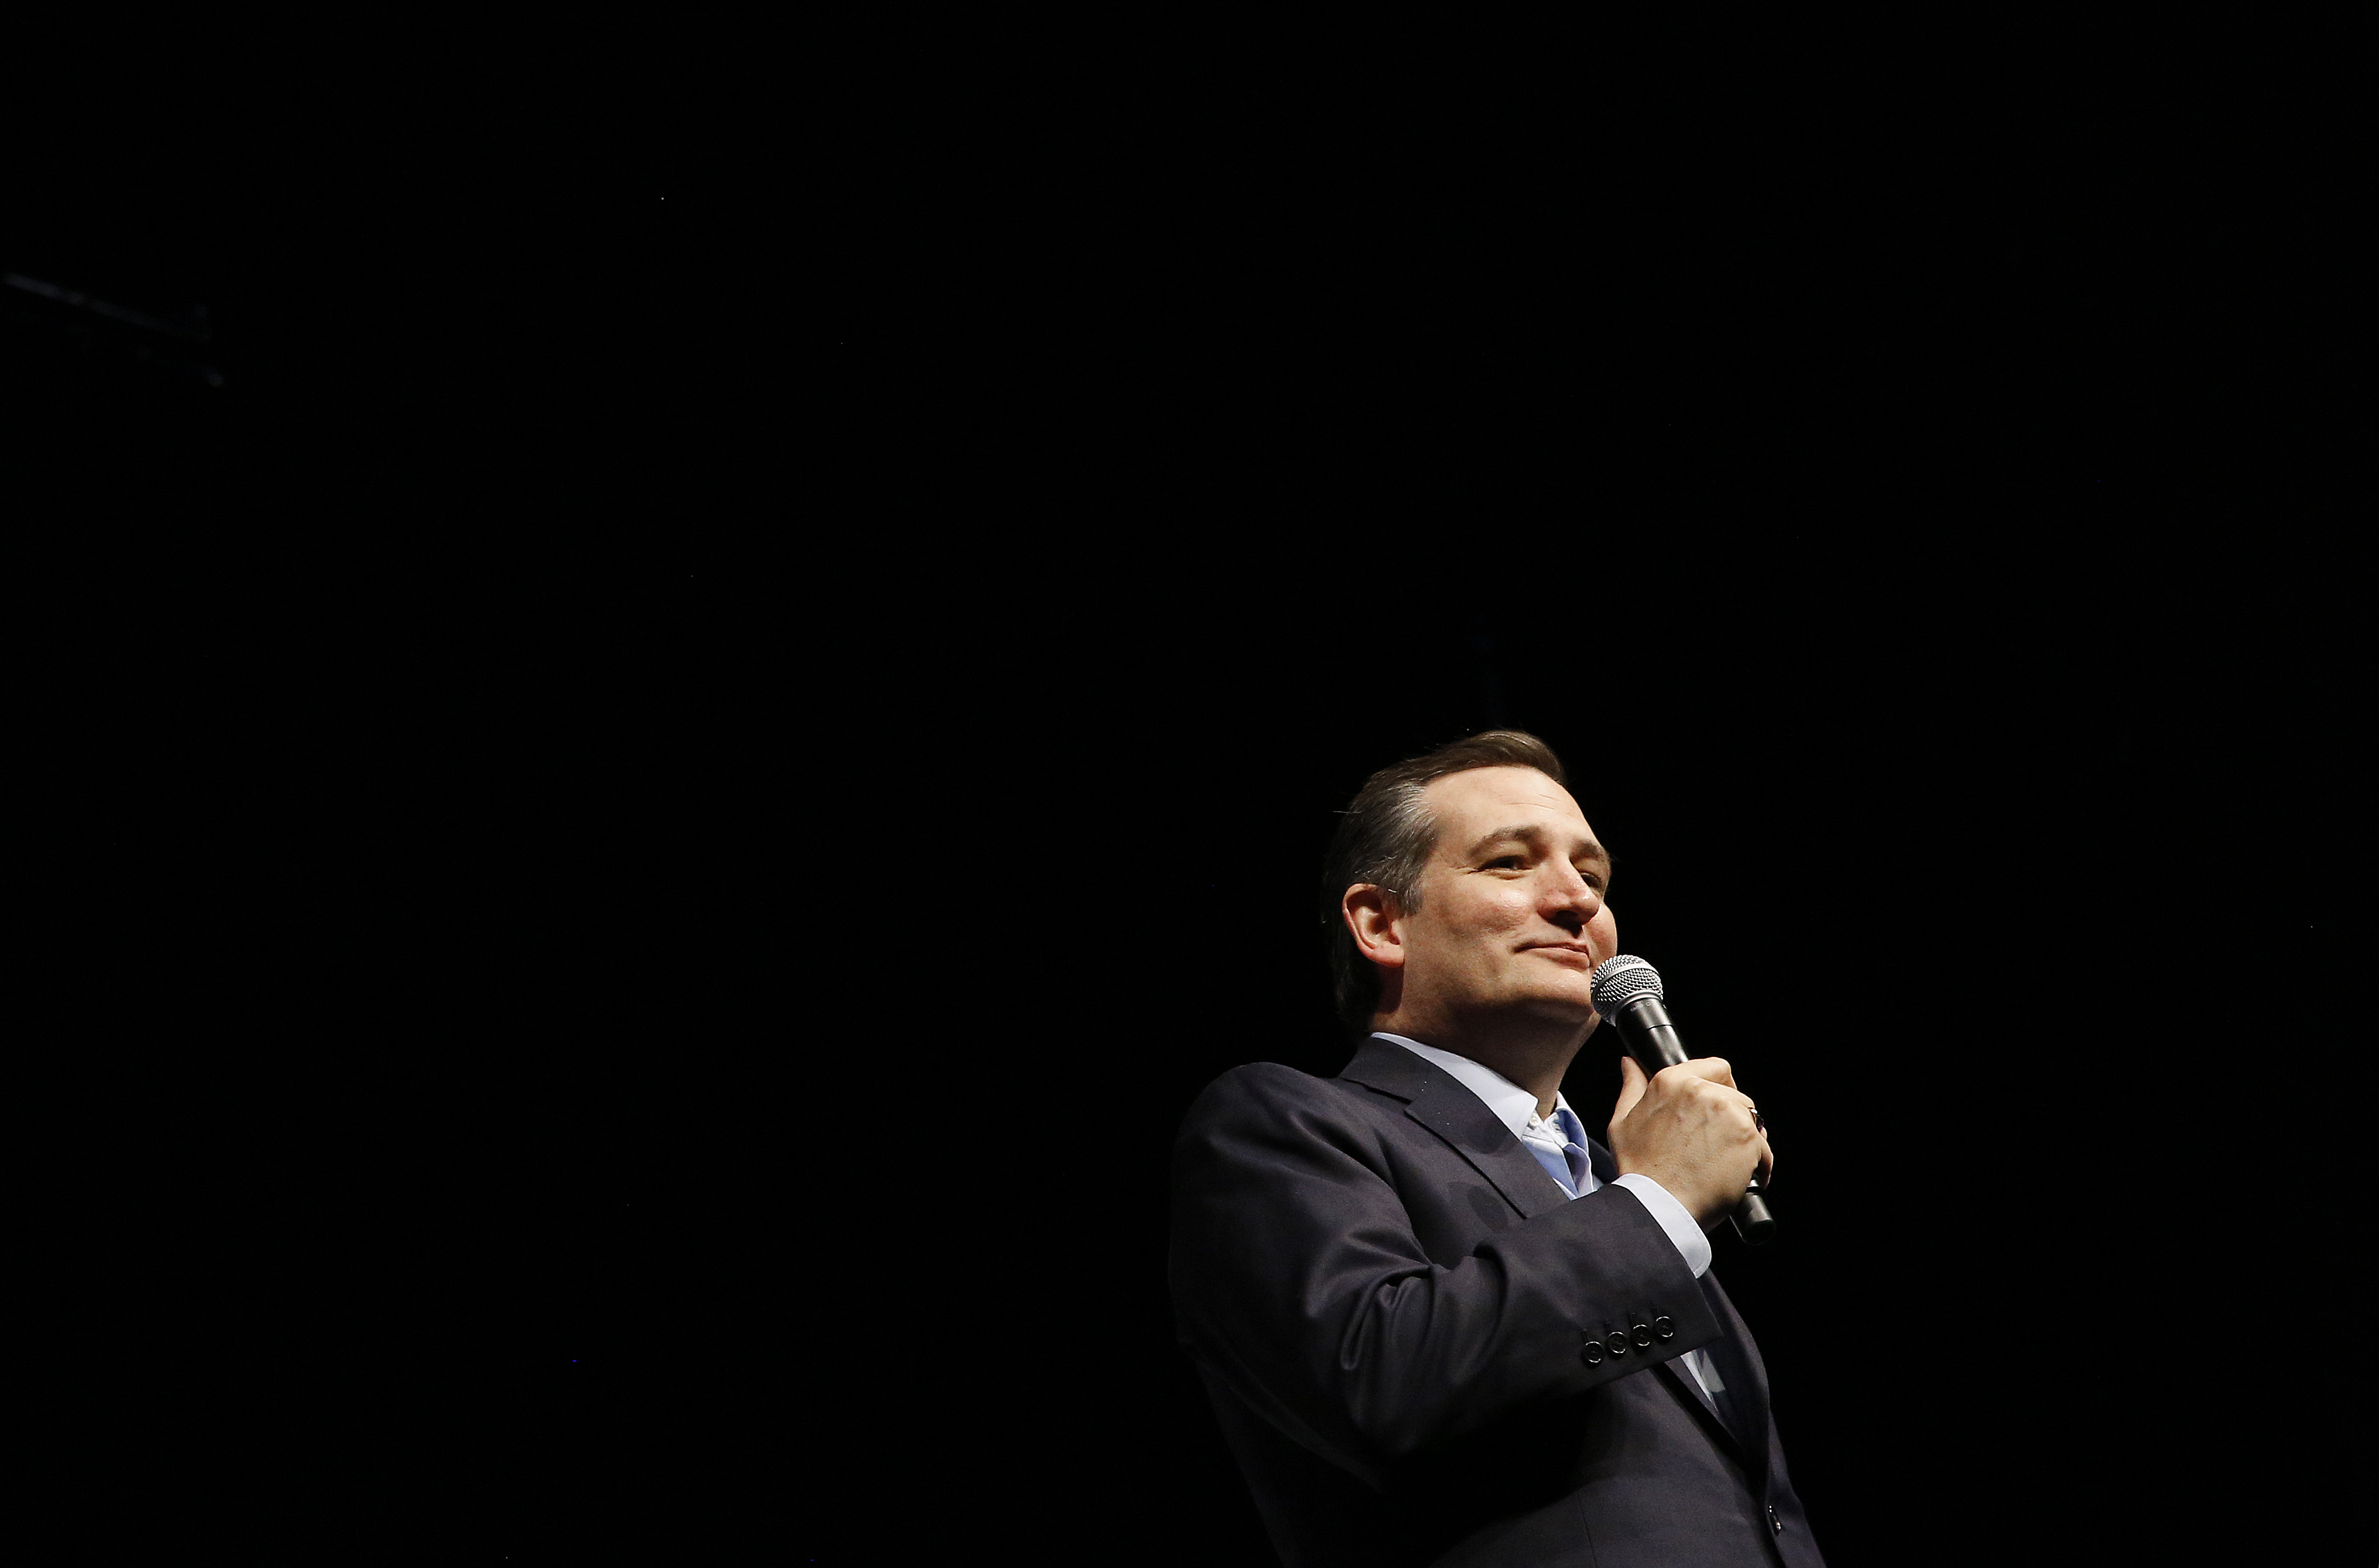 Sen. Ted Cruz dropped out of the presidential race at just the right moment.